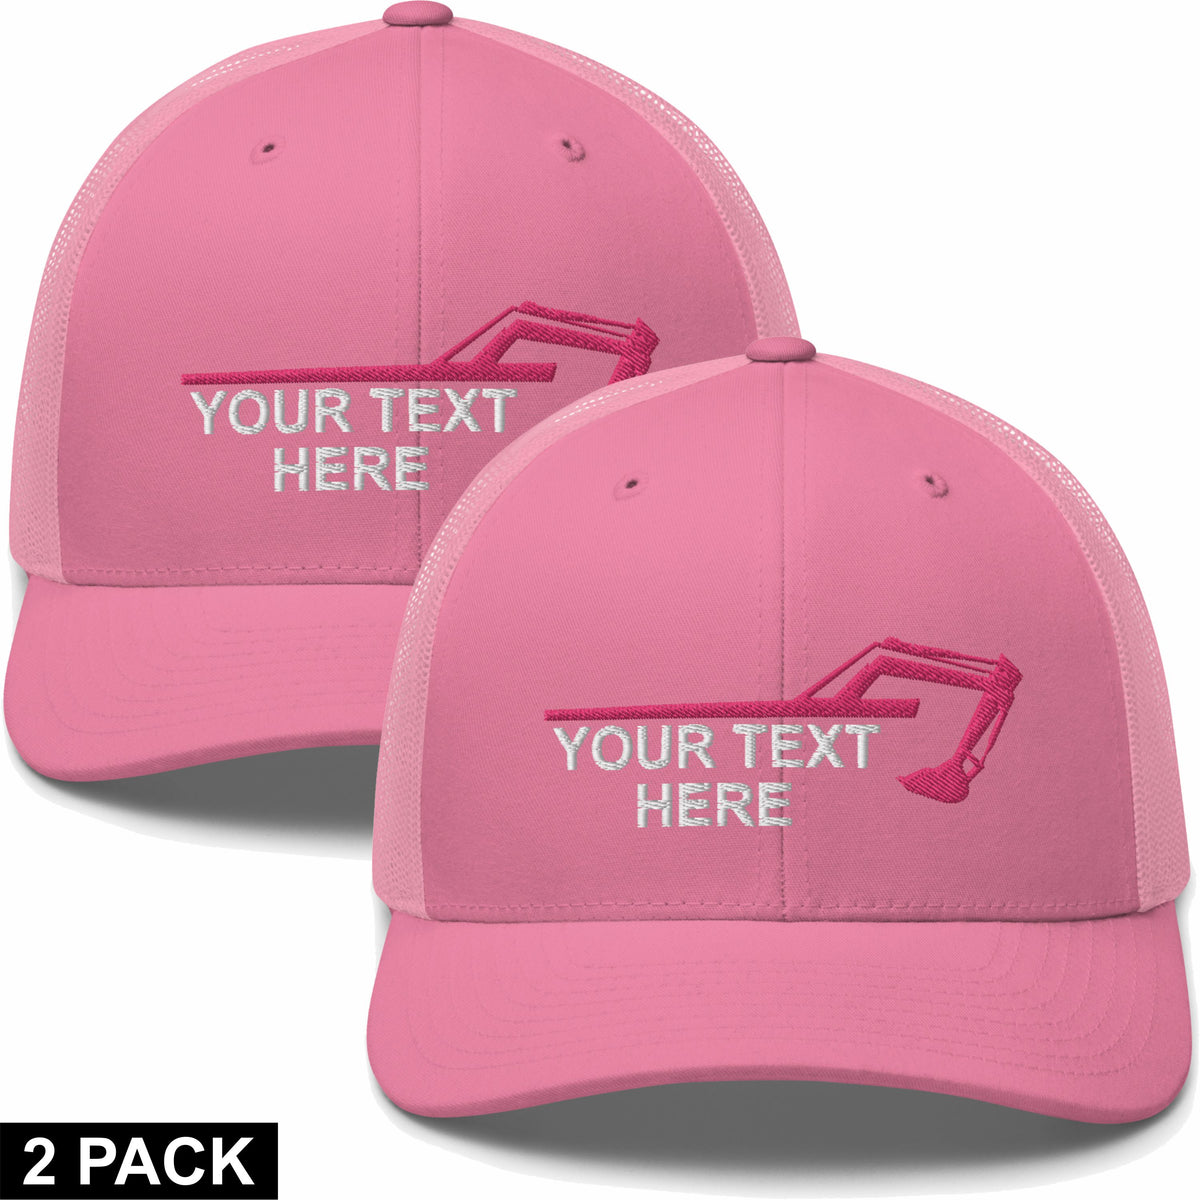 2 Embroidered Hats - Excavator Arm Bucket - Your Text Here - Free Shipping